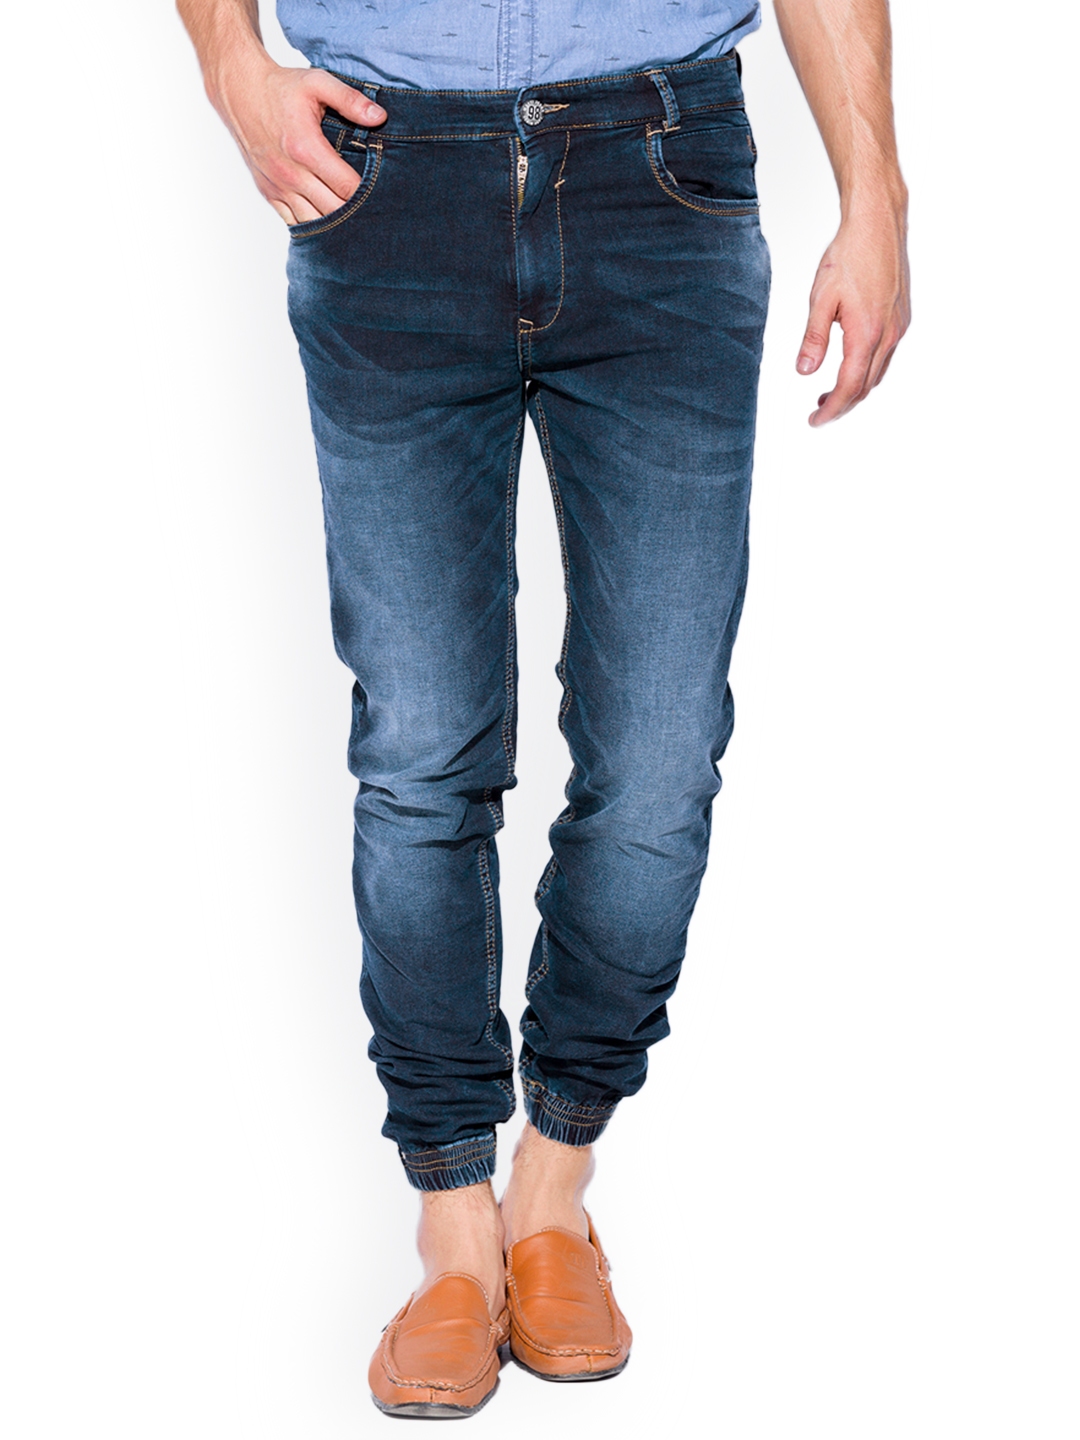 joggers jeans mufti